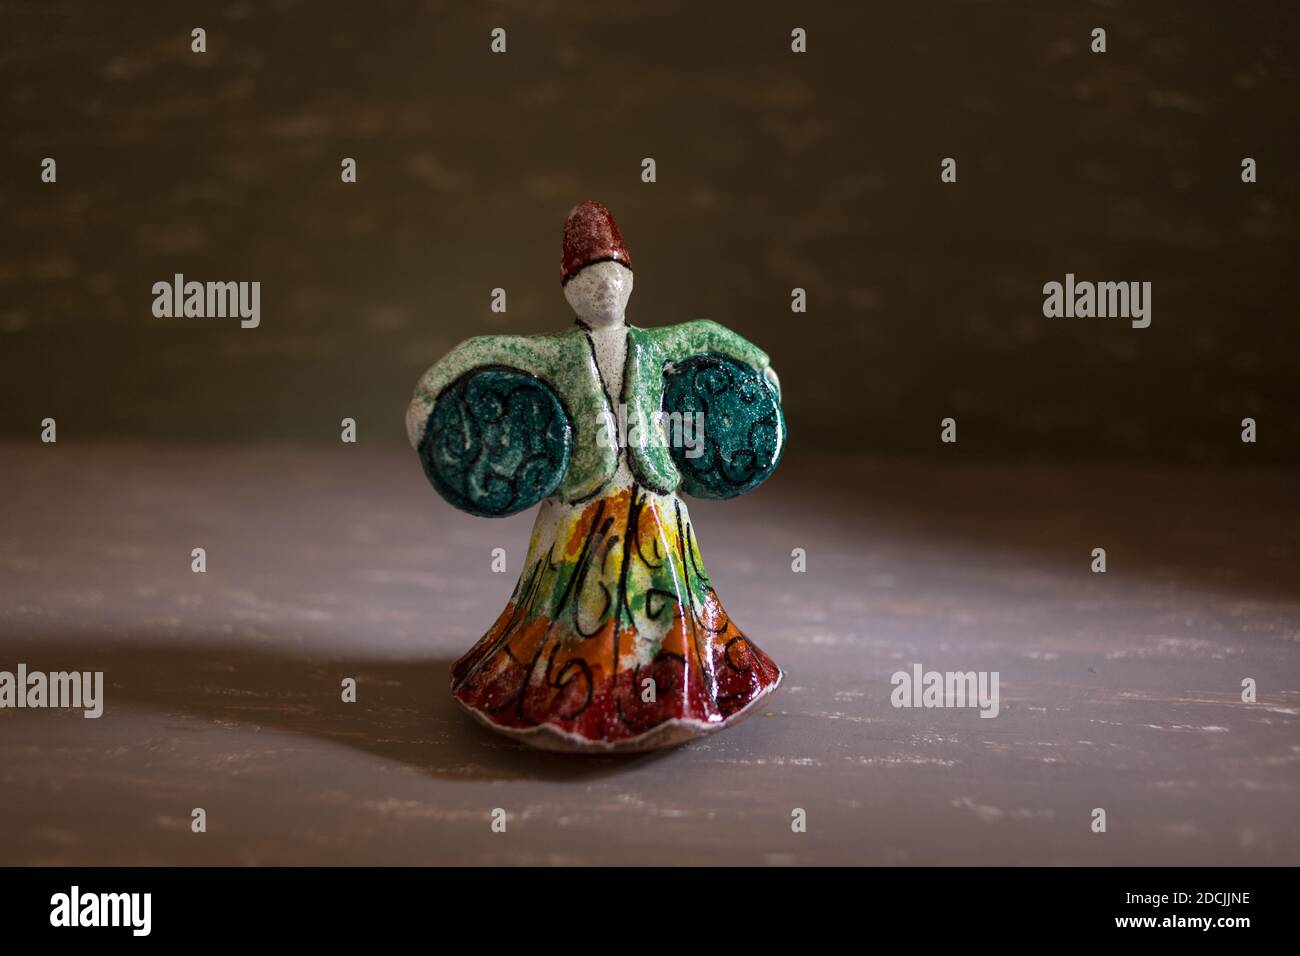 Cairo, November 10. traditional   handmade pottery statue of dancing dervish (a member of a Muslim (specifically Sufi) religious order) with colorful Stock Photo